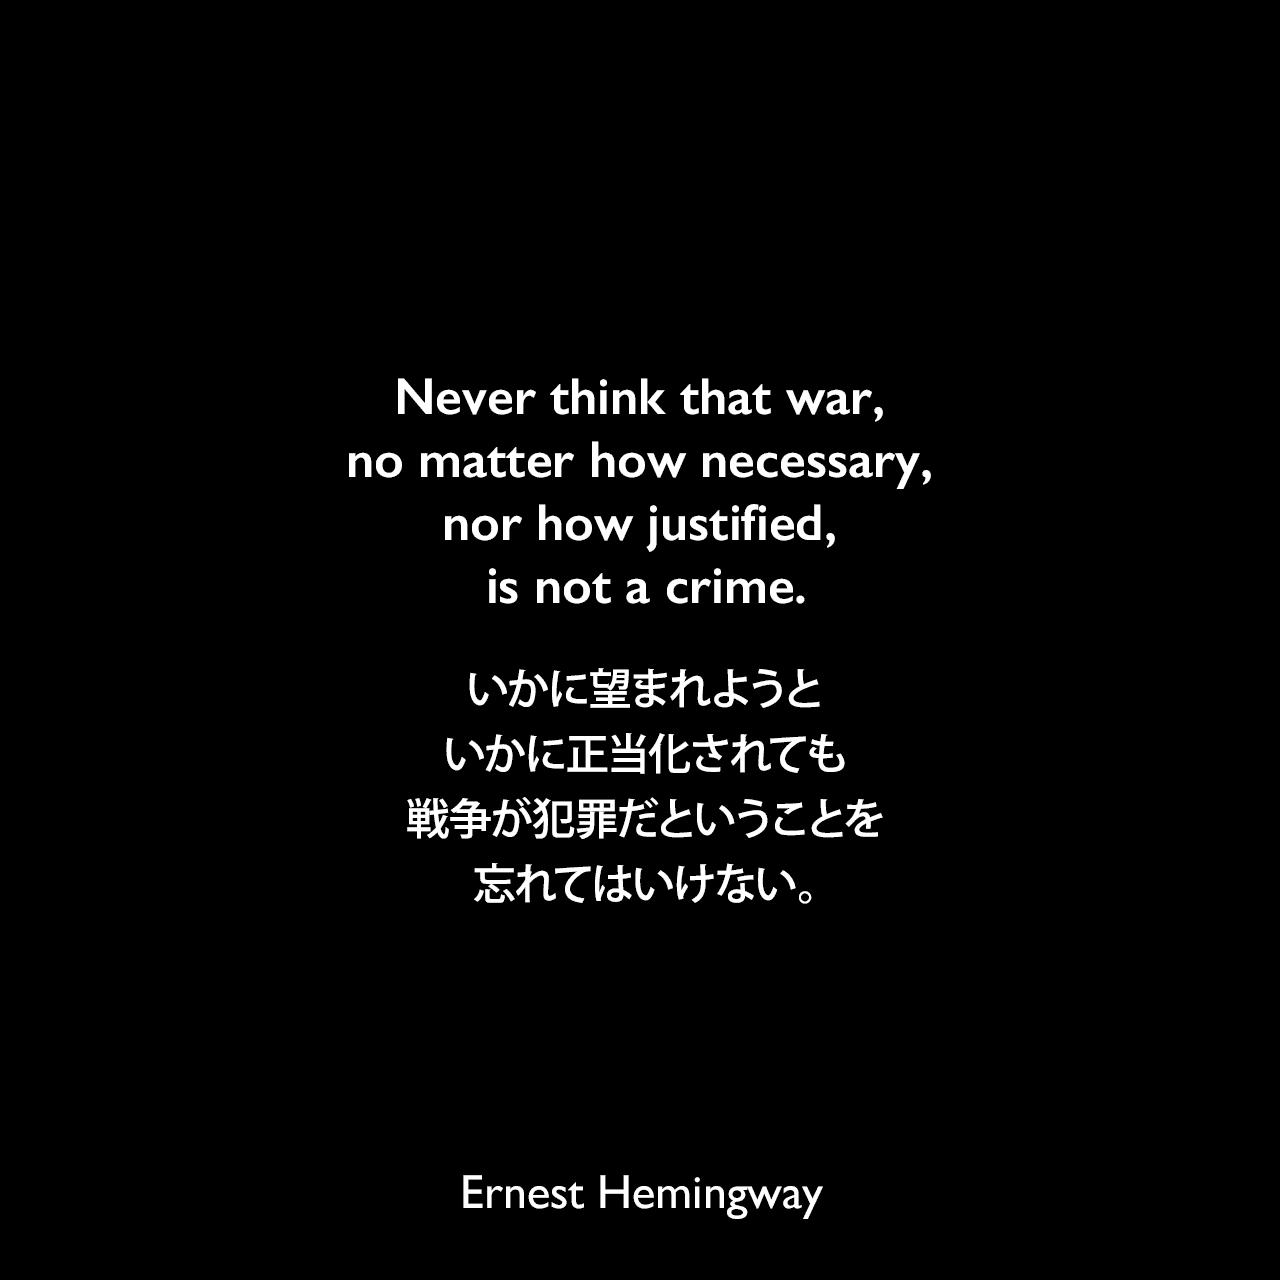 Never think that war, no matter how necessary, nor how justified, is not a crime.いかに望まれようと、いかに正当化されても、戦争が犯罪だということを忘れてはいけない。Ernest Hemingway